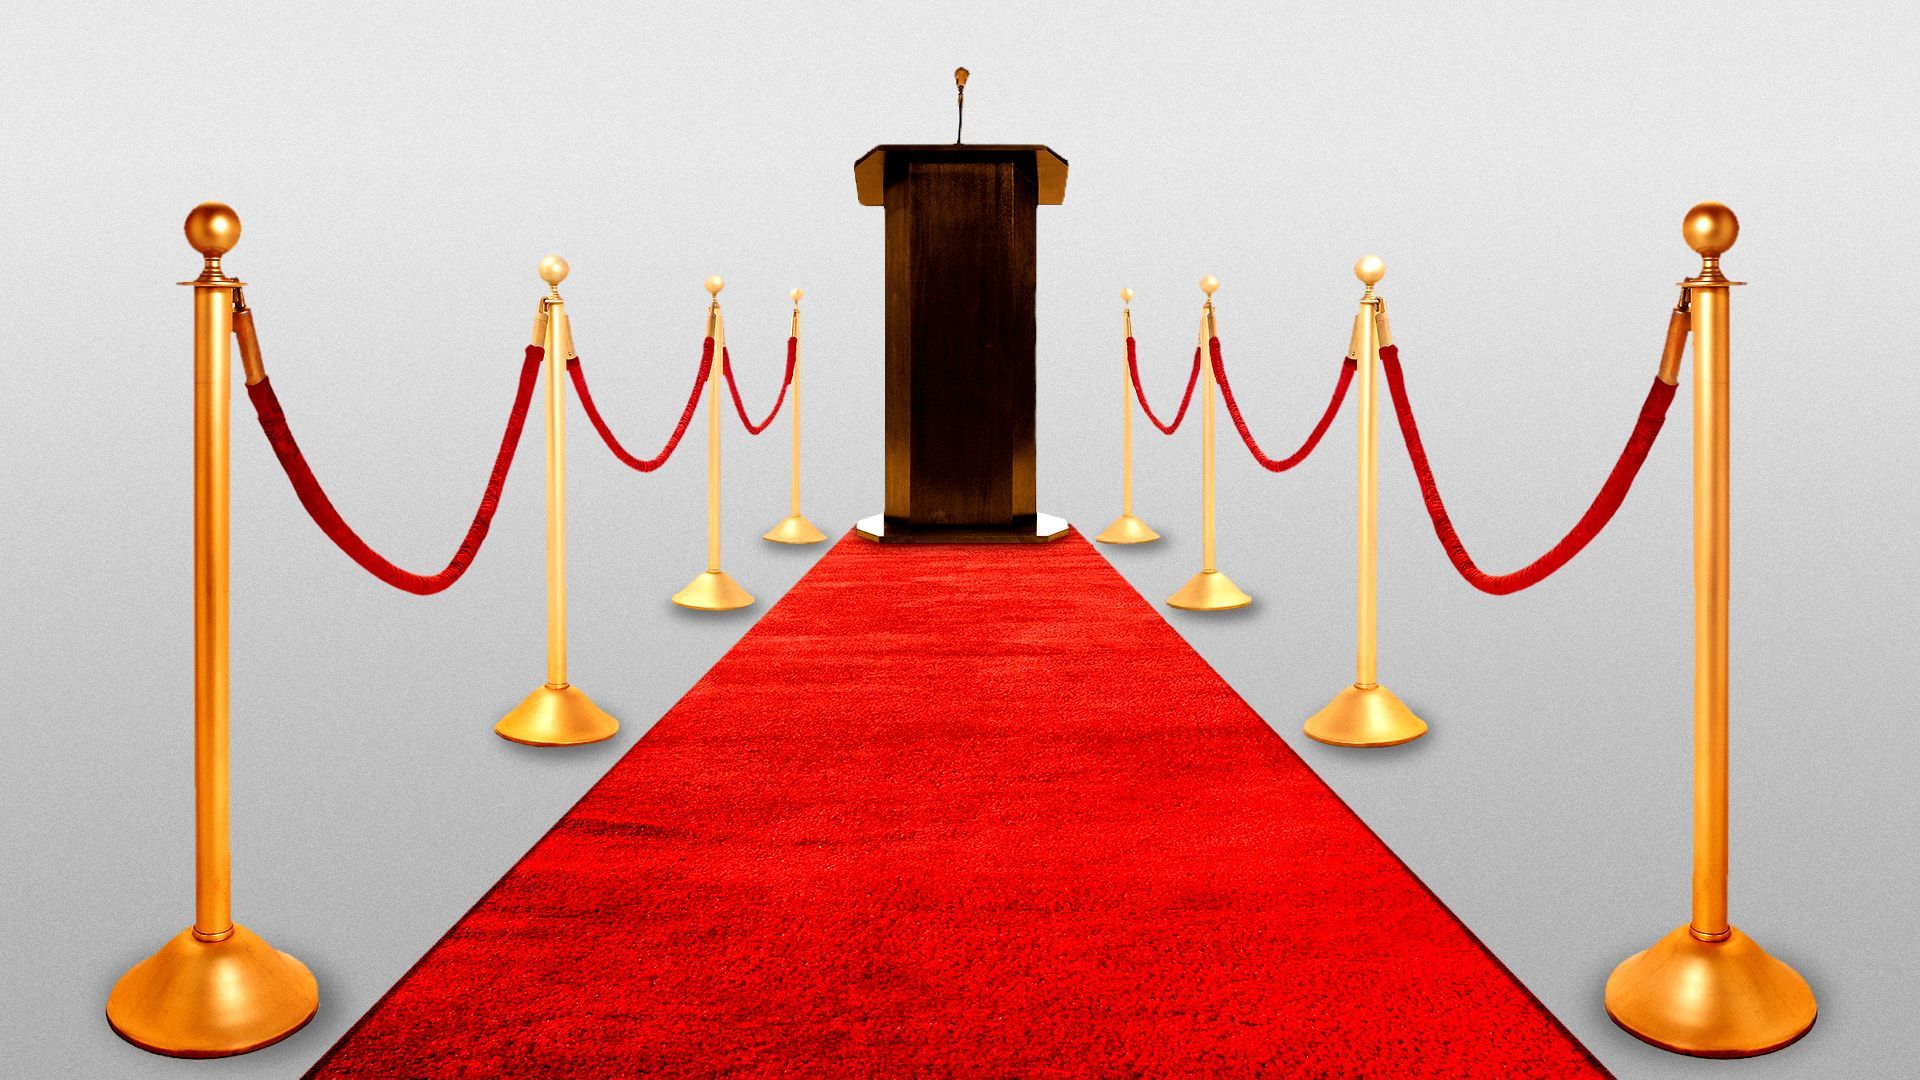 Illustration of a podium at the end of a long red carpet